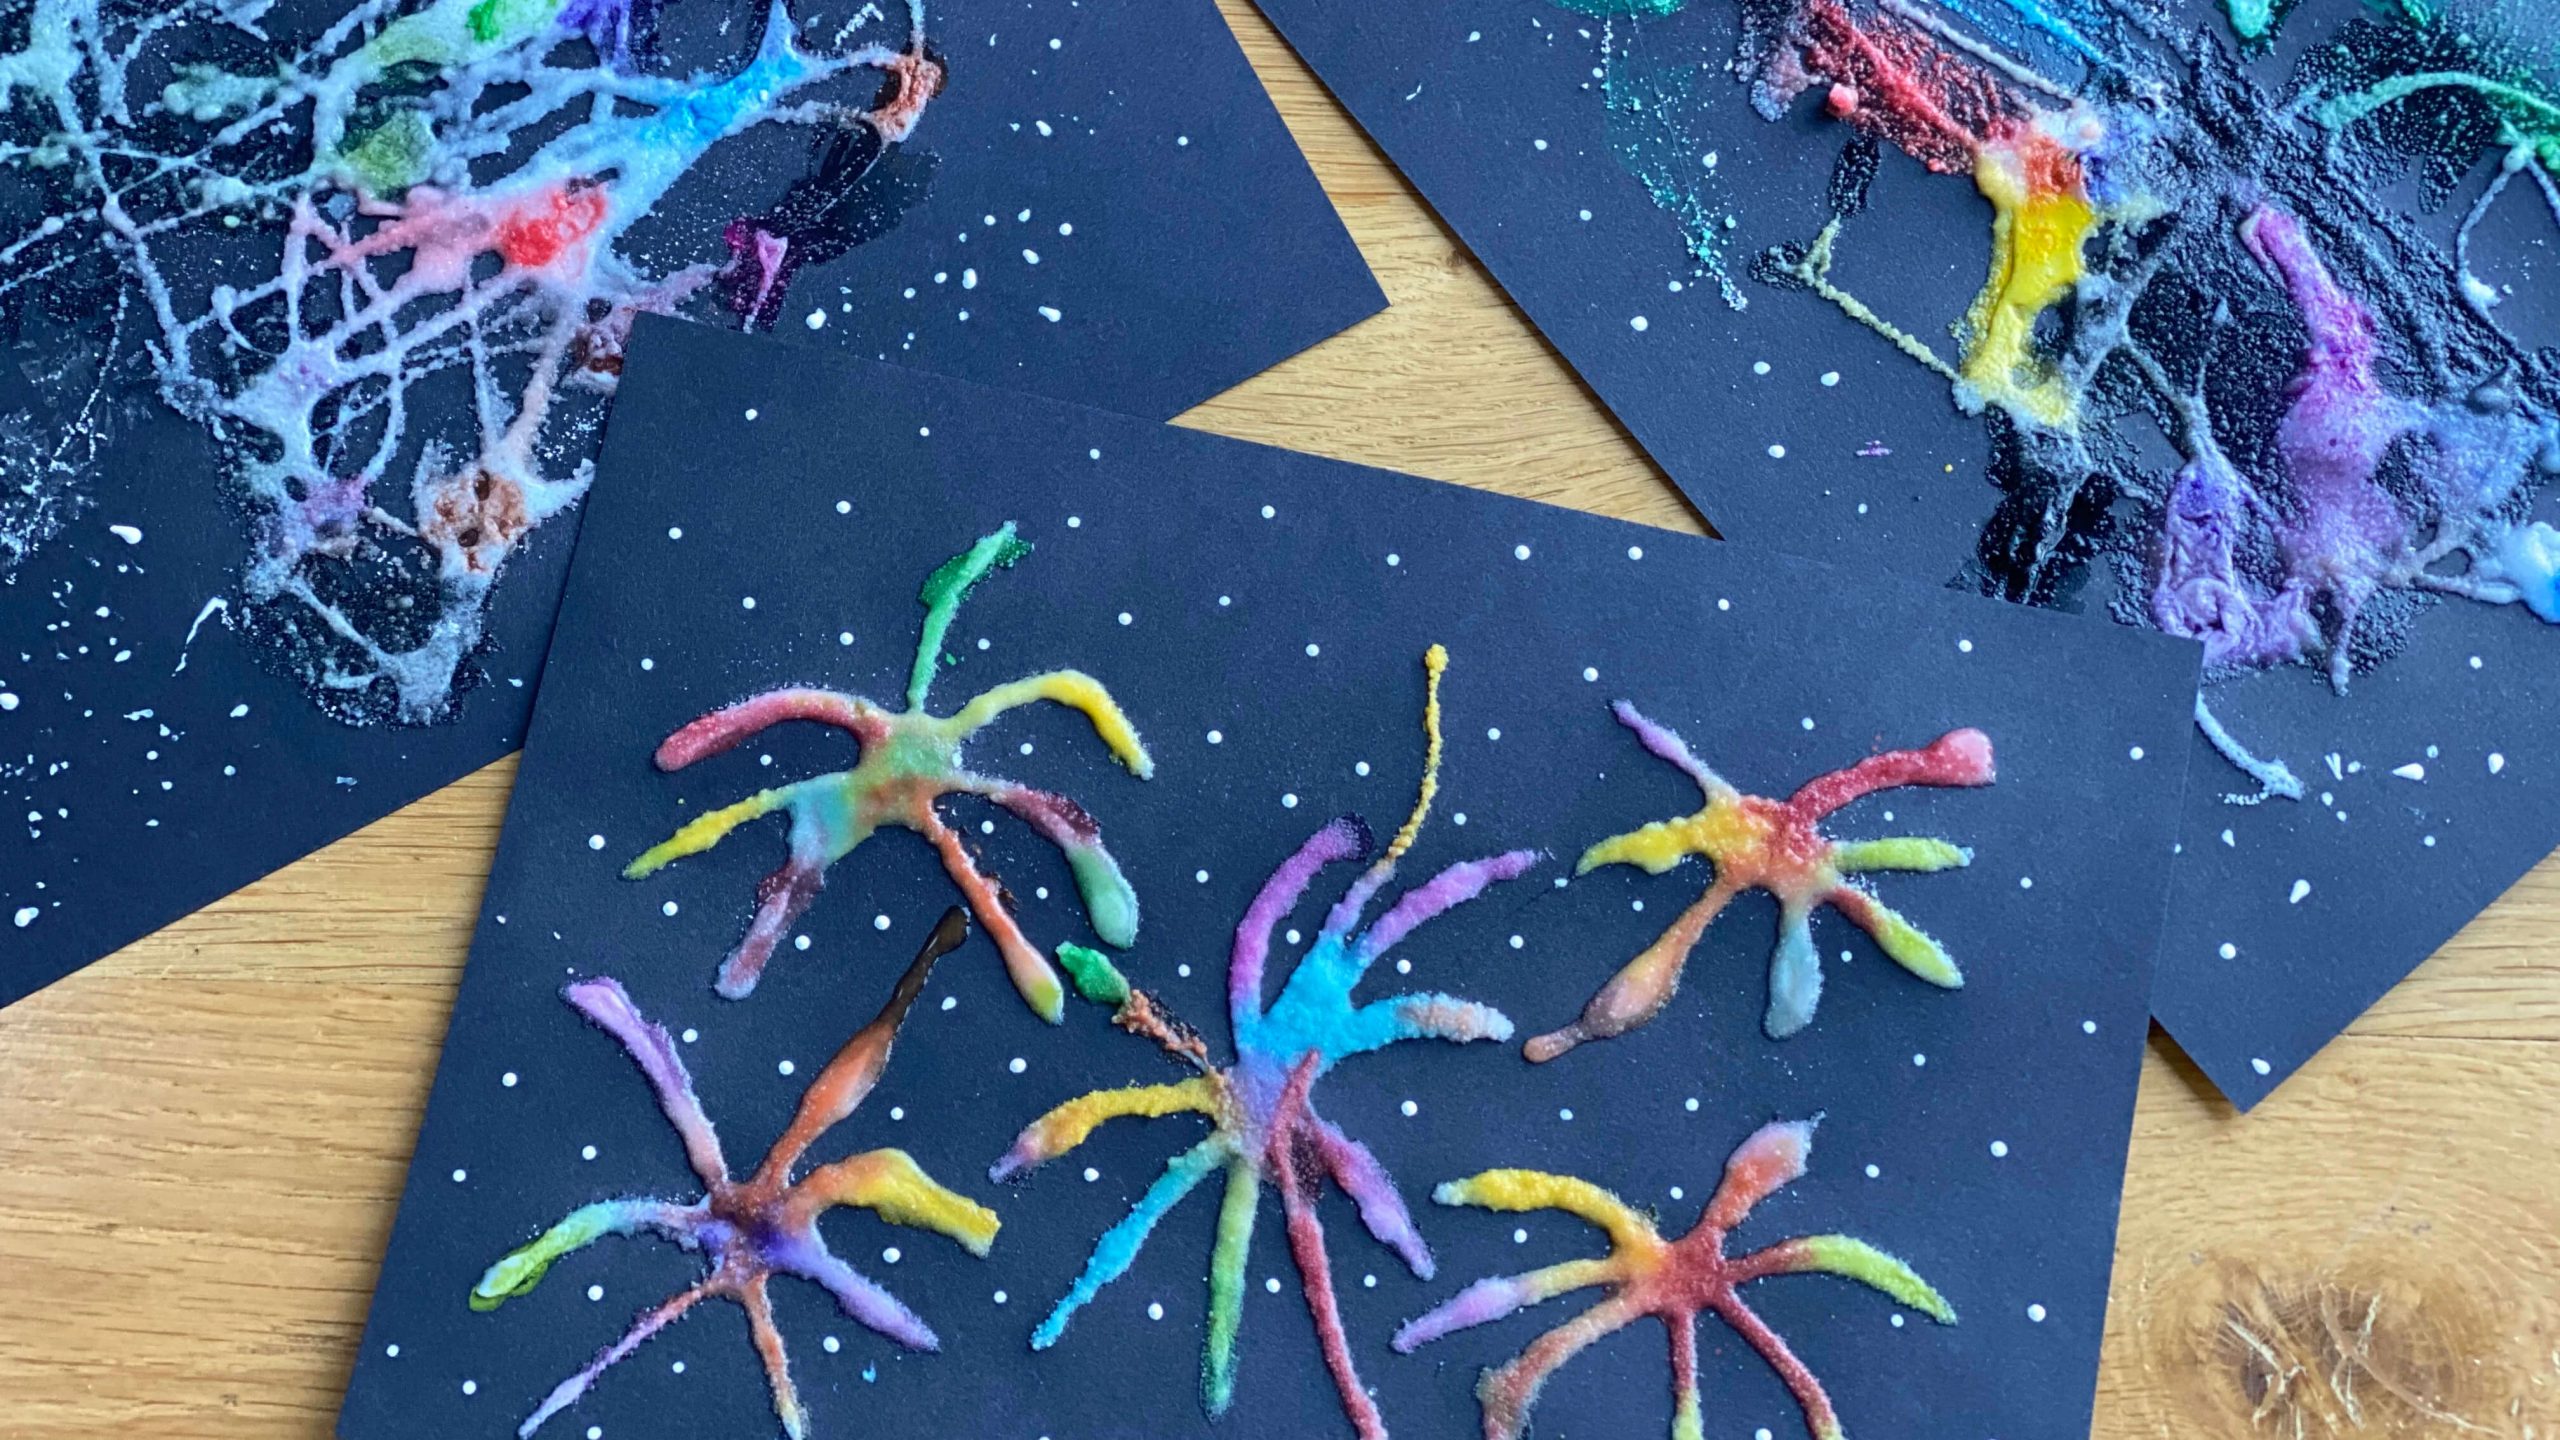 Pretty Fireworks Craft For School Projects Using Salt